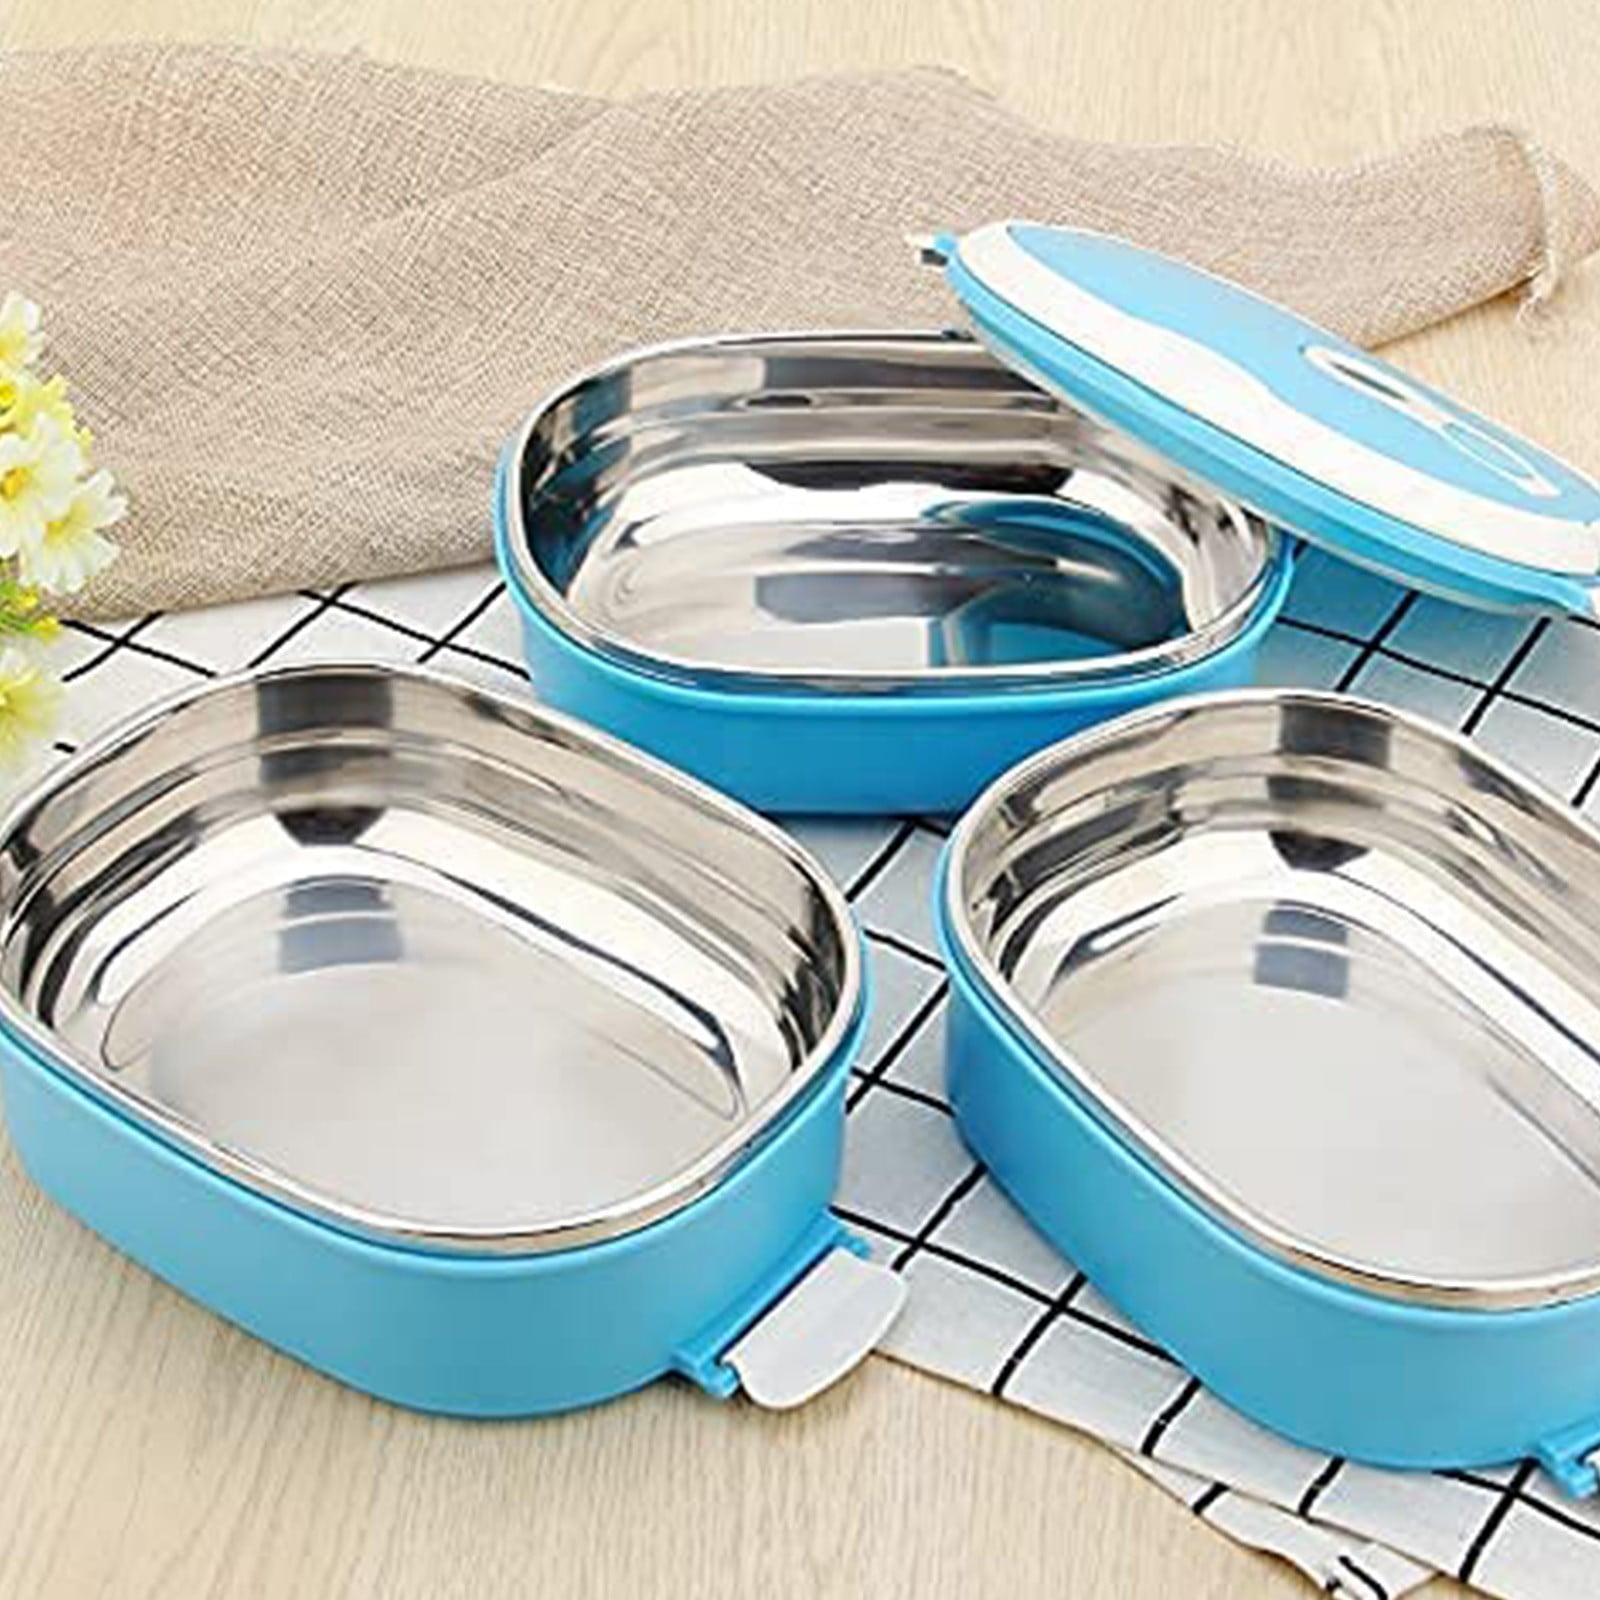 Ioaoai Bento Box 1 Set Meal Preservation Leak-Proof Useful Stainless Steel Liner Lunch Box Utensil Set, Size: 21, Blue